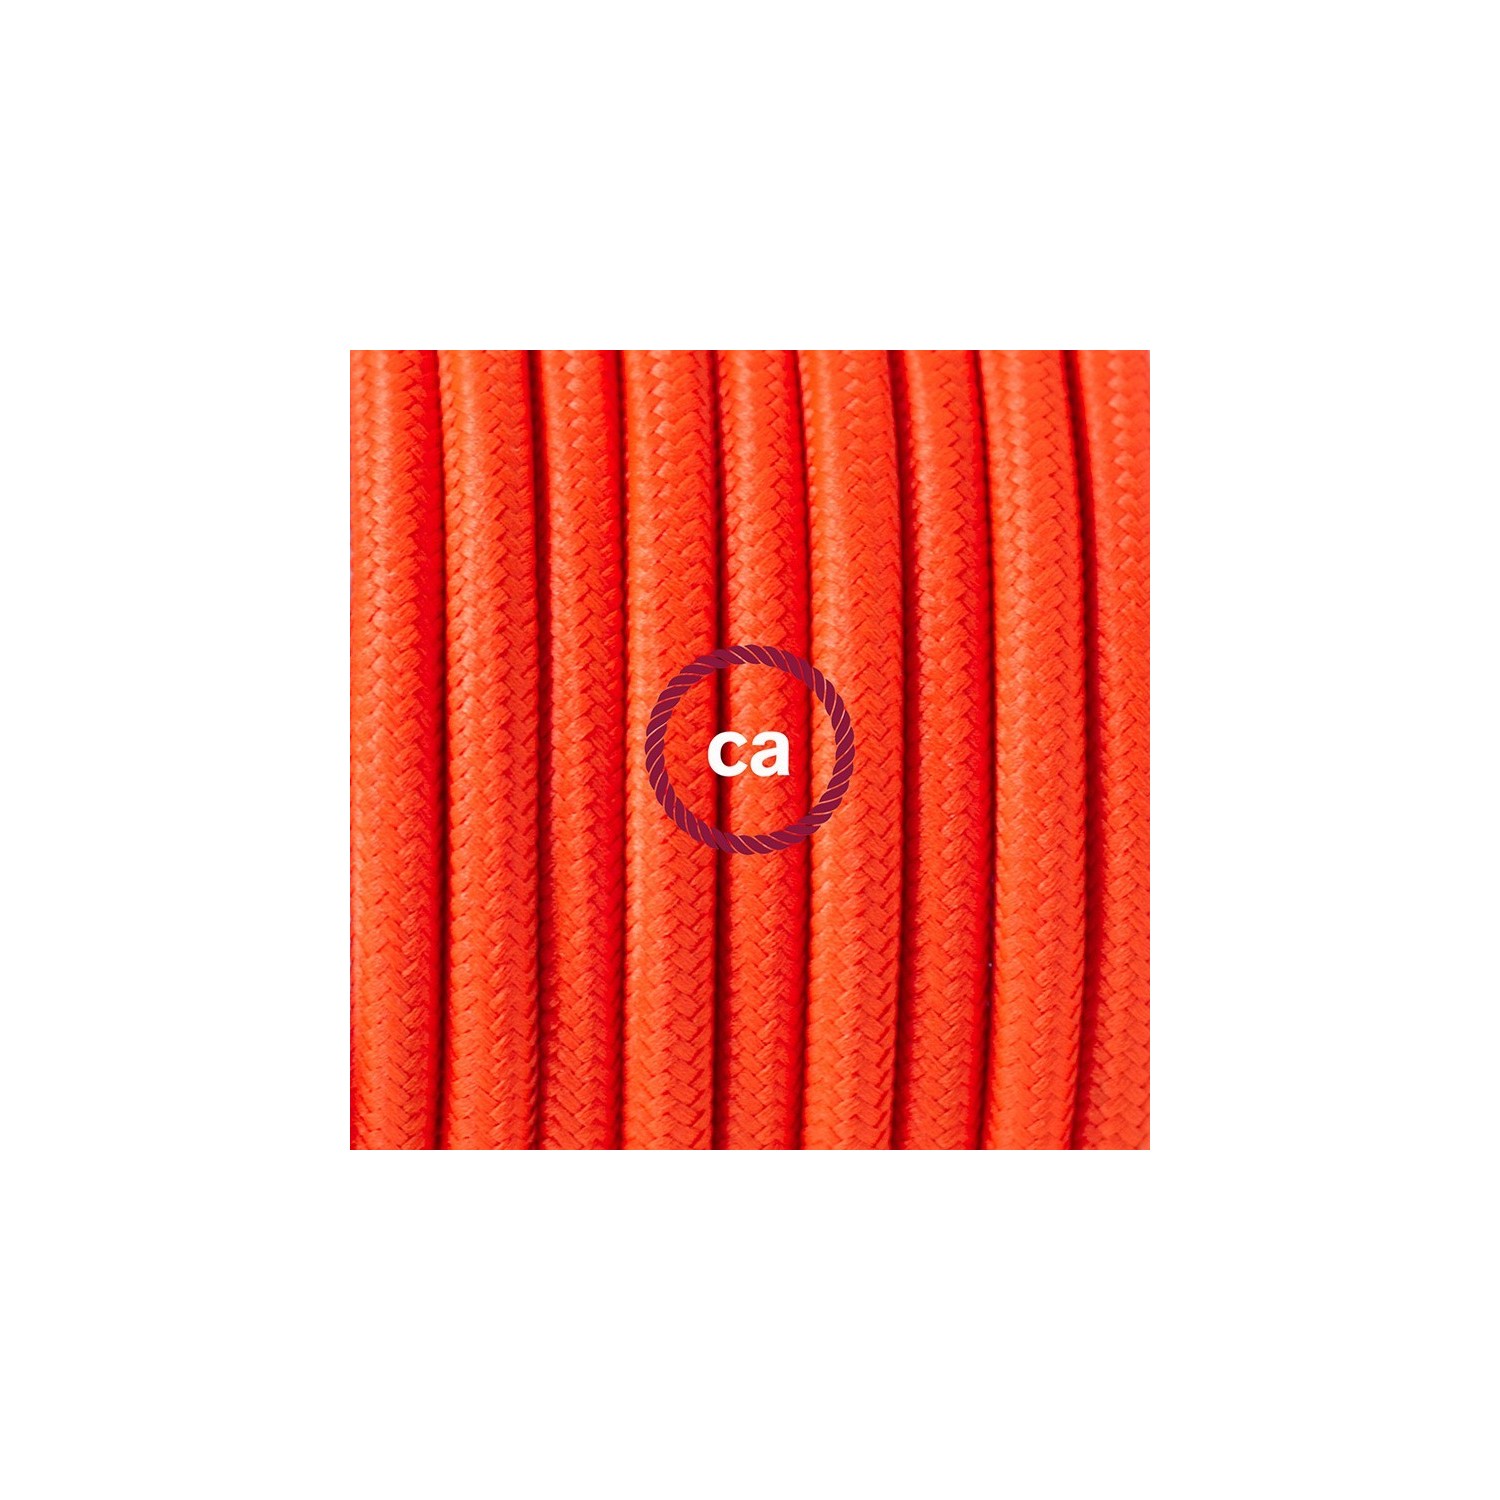 Create your RF15 Orange Fluo Snake and bring the light wherever you want.